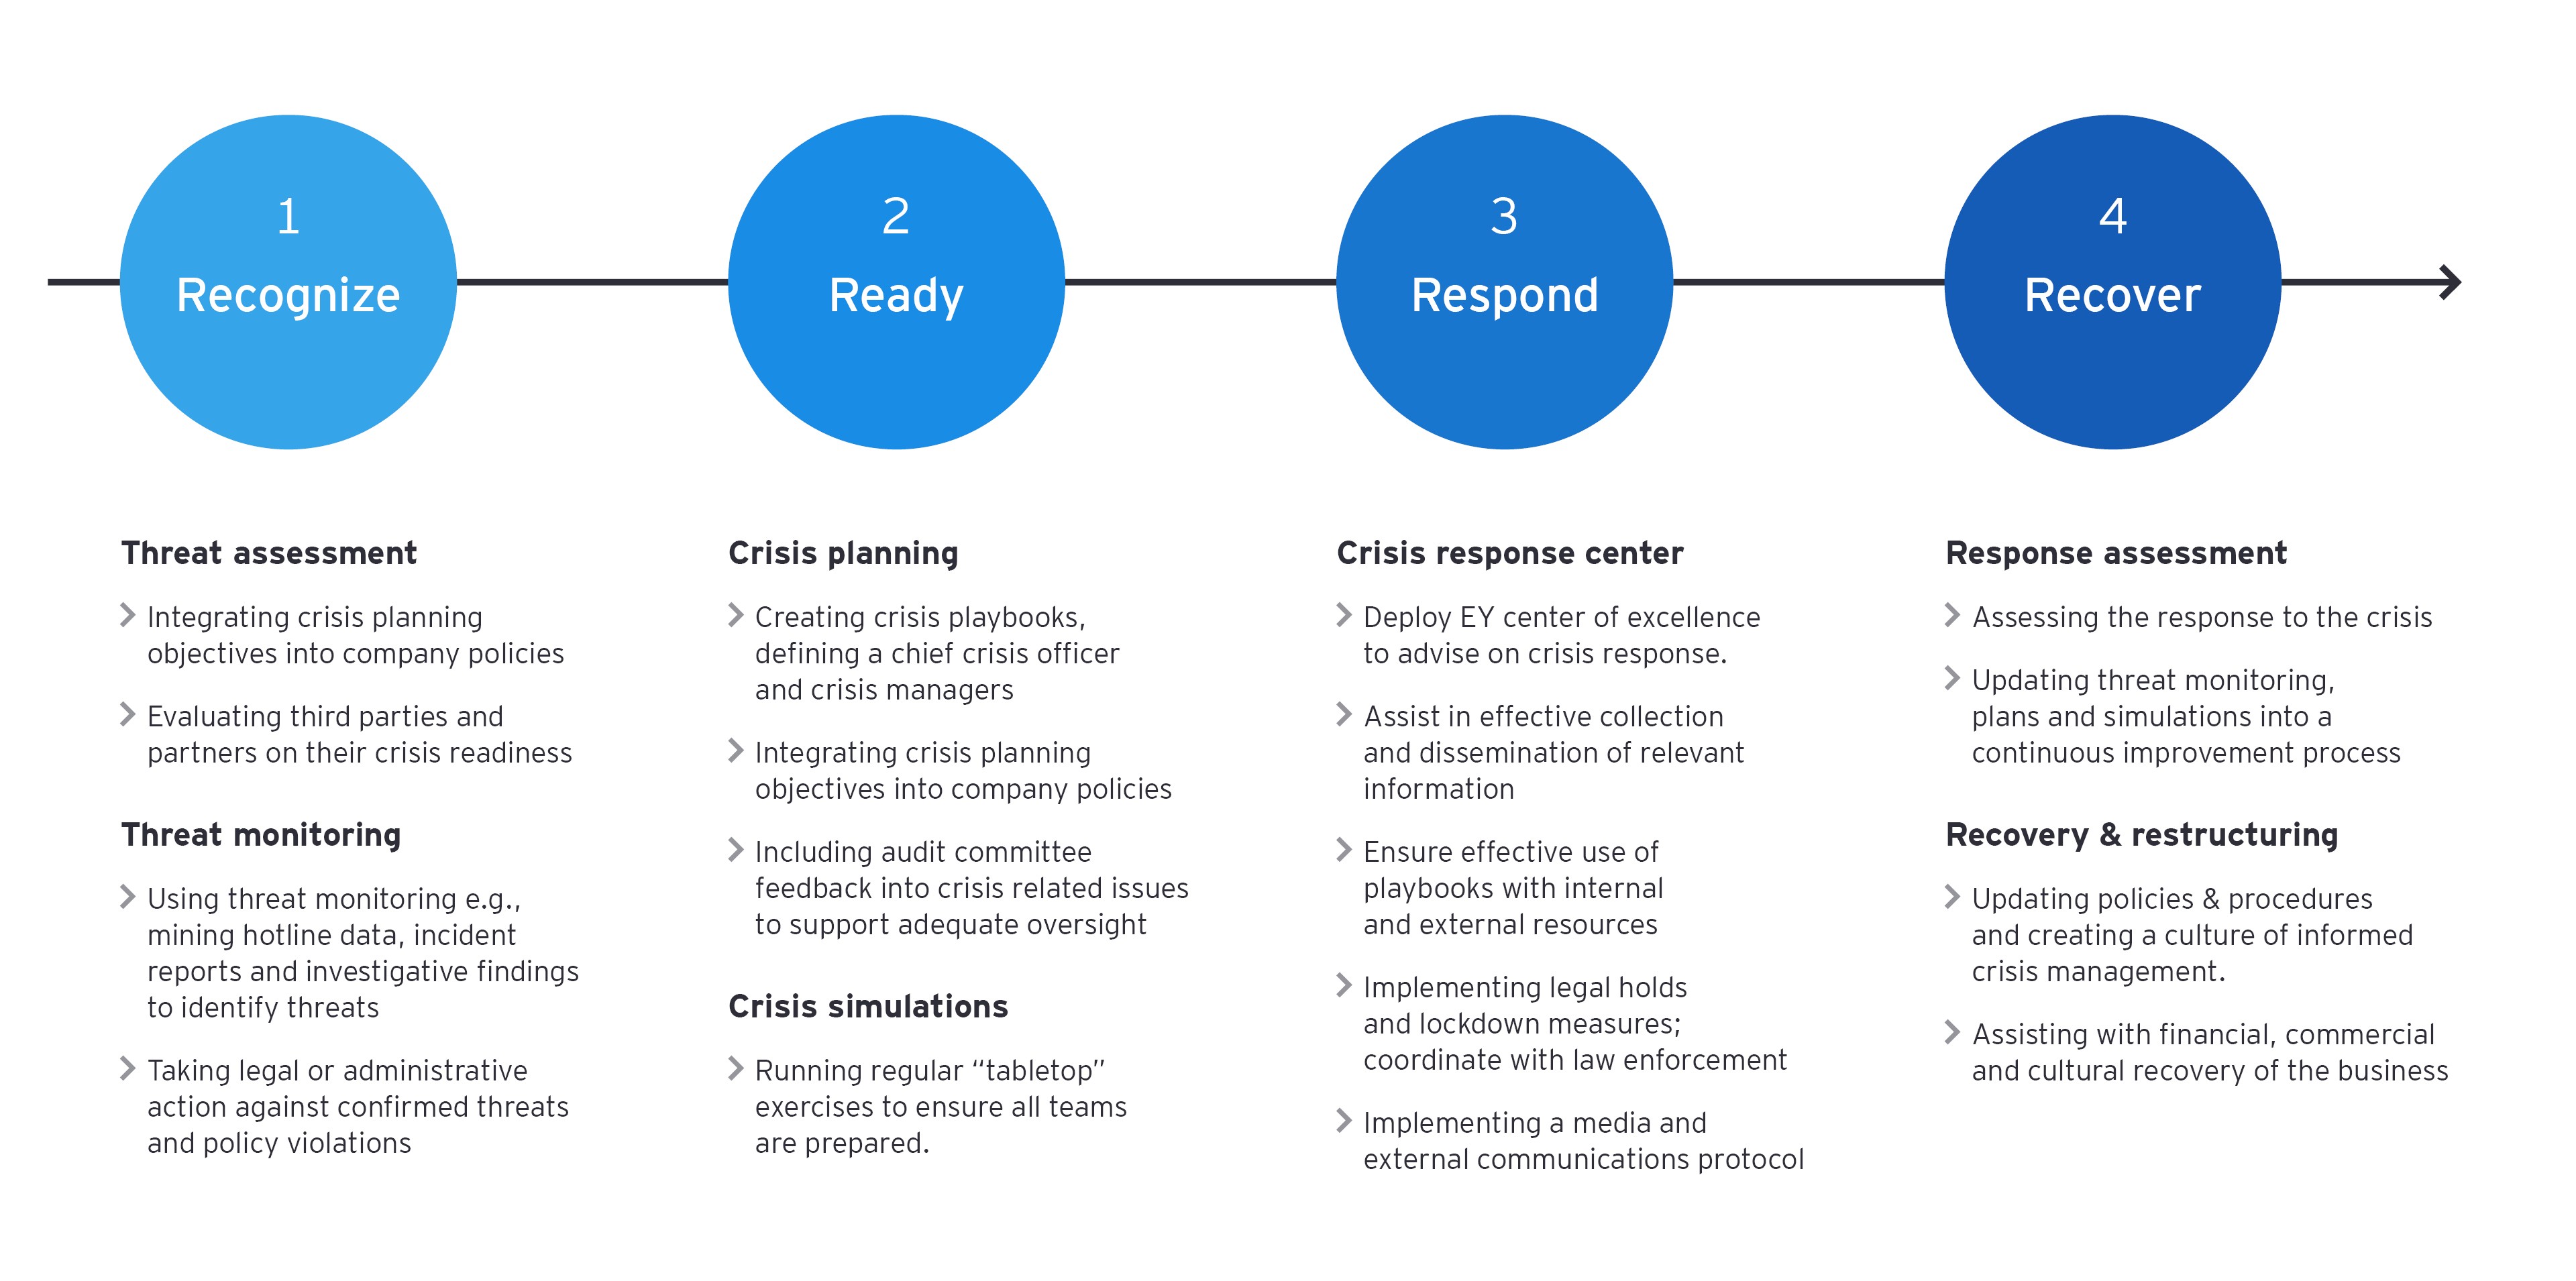 The four key stages in the Crisis Management life cycle